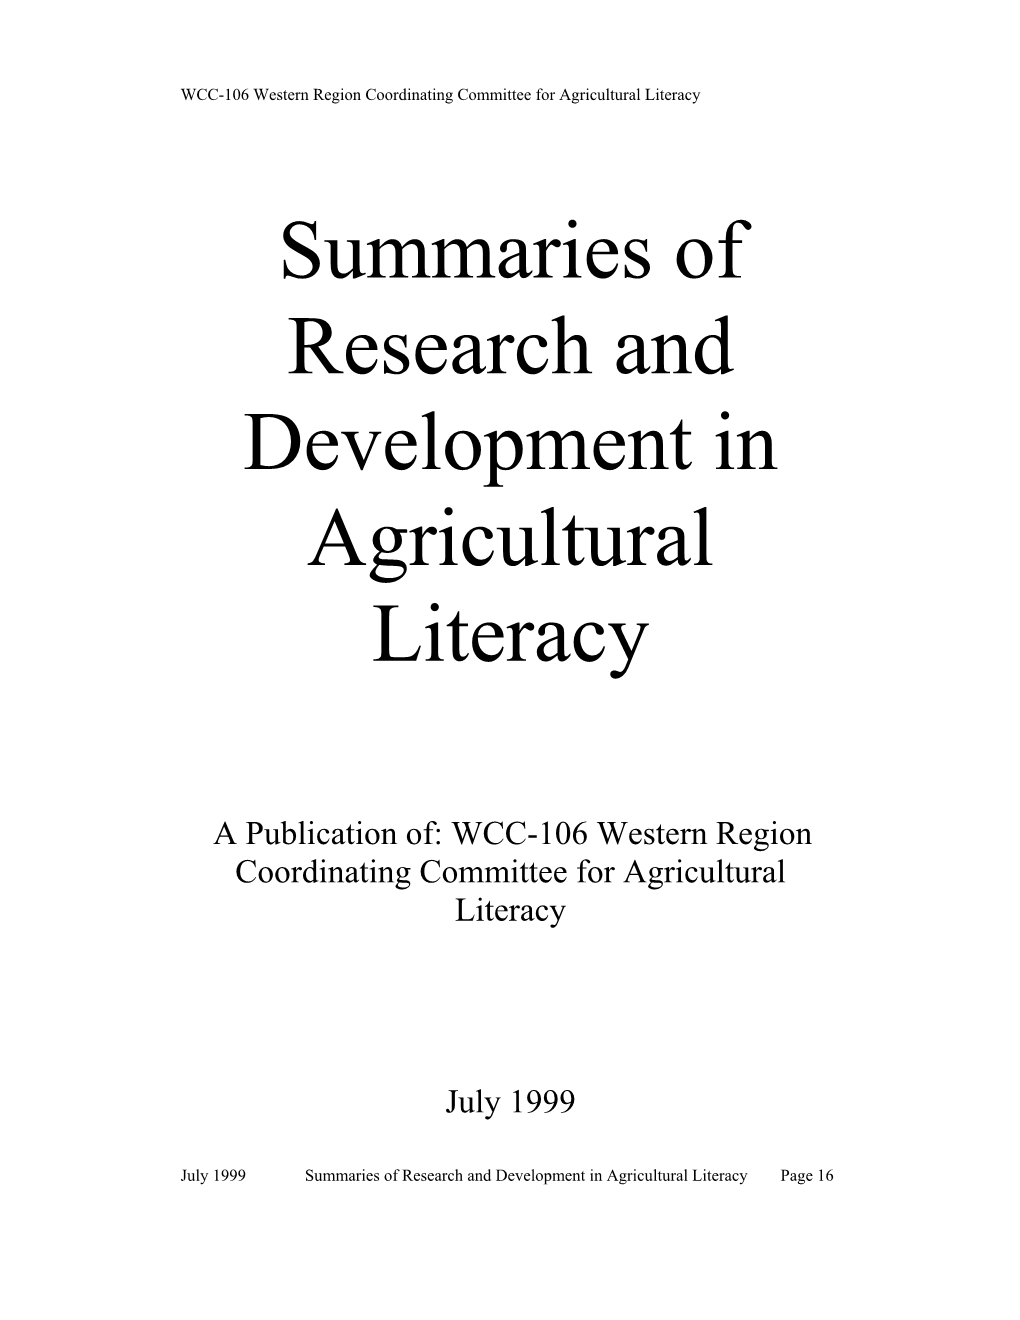 Summaries of Research and Development in Agricultural Literacy